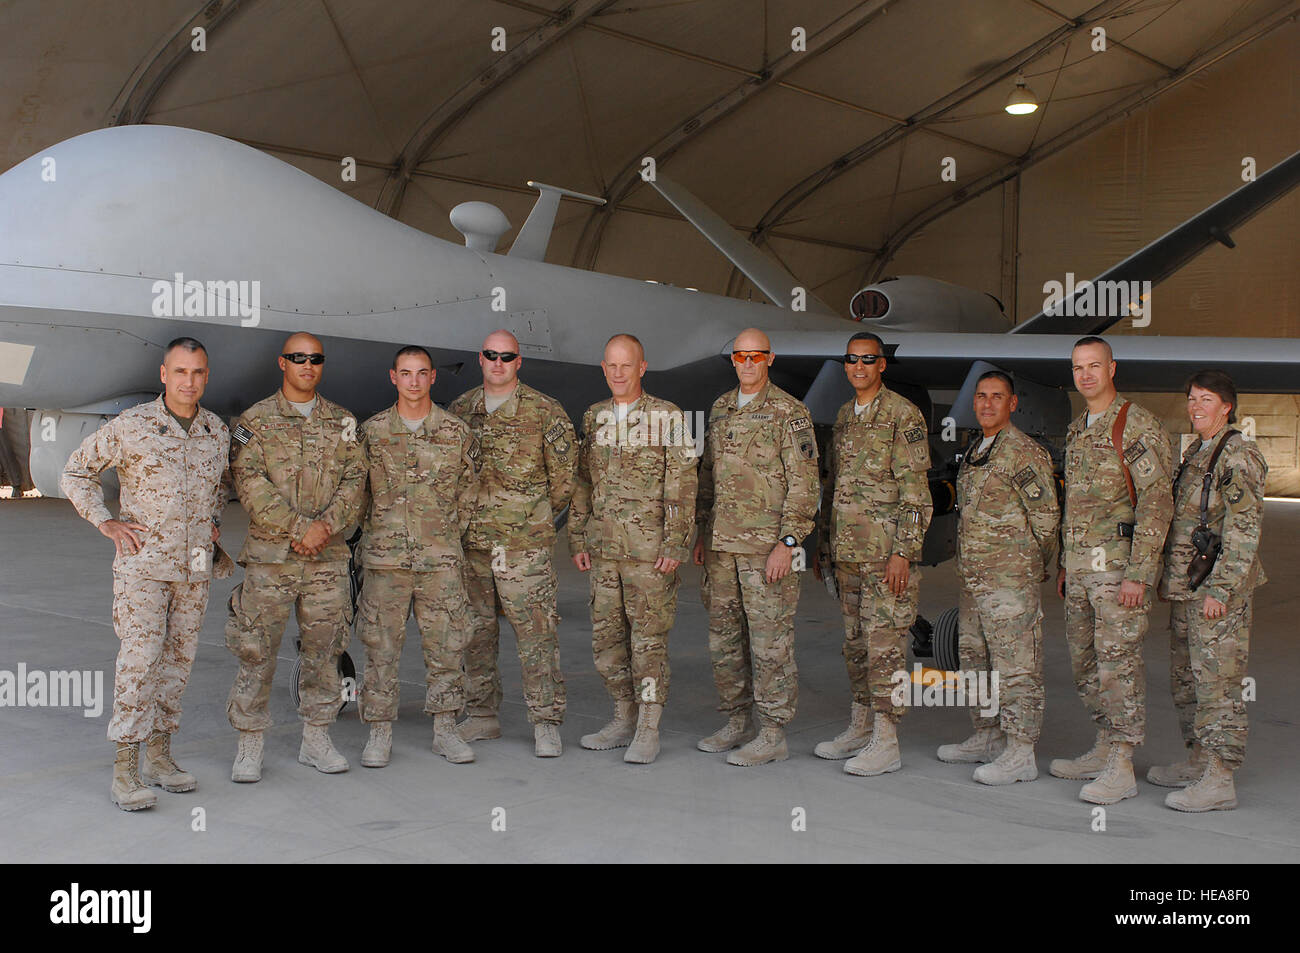 U.S. Marine Corps Sgt. Maj. James Booker, International Security Assistance Force and United States Forces-Afghanistan senior enlisted leader, and U.S. Army Command Sgt. Maj. Scott Schroeder, ISAF Joint Command sergeant major, pose for a group photo with members of the 451st Expeditionary Aircraft Maintenance Squadron during a visit to Kandahar Airfield, Afghanistan Sept. 23, 2013. The two enlisted leaders visited KAF in an effort to understand the missions of the base and meet with different service members.  Senior Airman Jack Sanders) Stock Photo